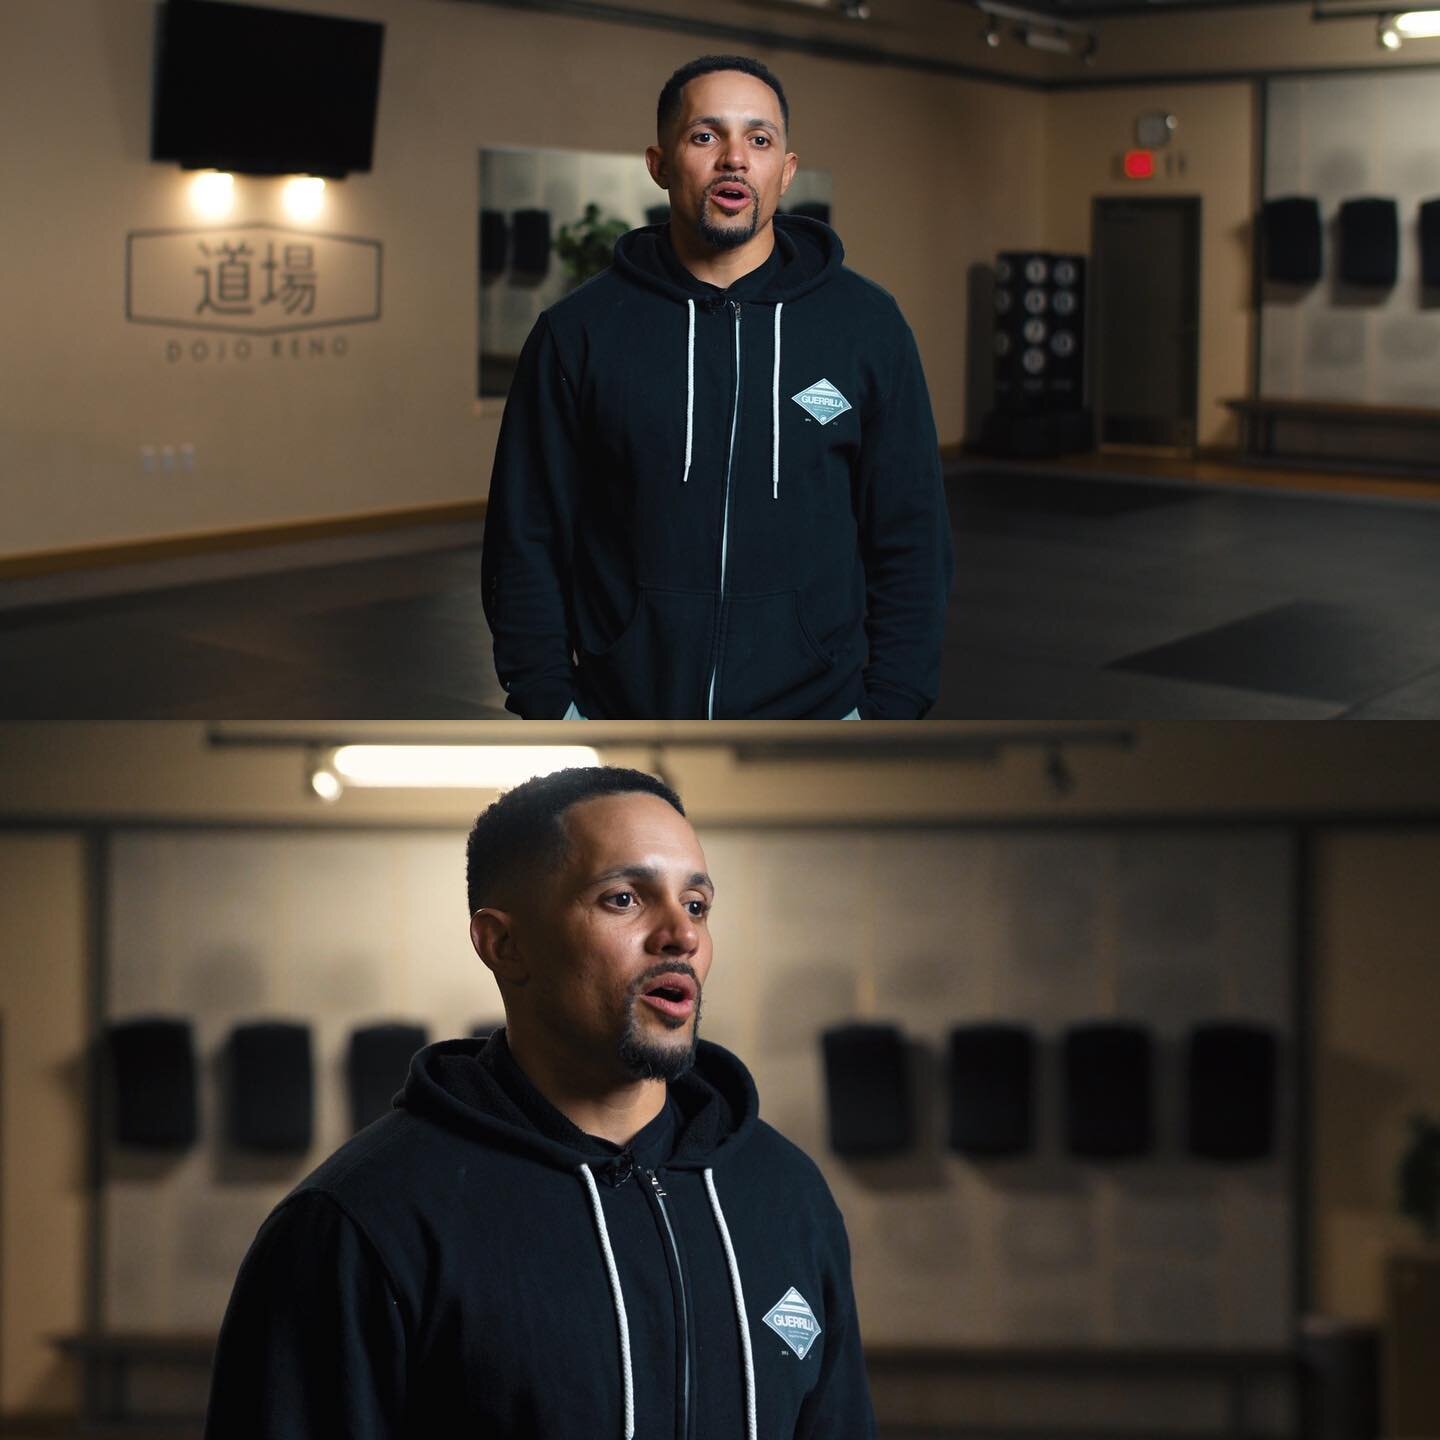 Some frames from a recent interview piece with @dojoreno 

We turned off most of the house lights and went with a darker look to add more drama to the point where these interviews would play. We kept the key light on camera right and added negative f